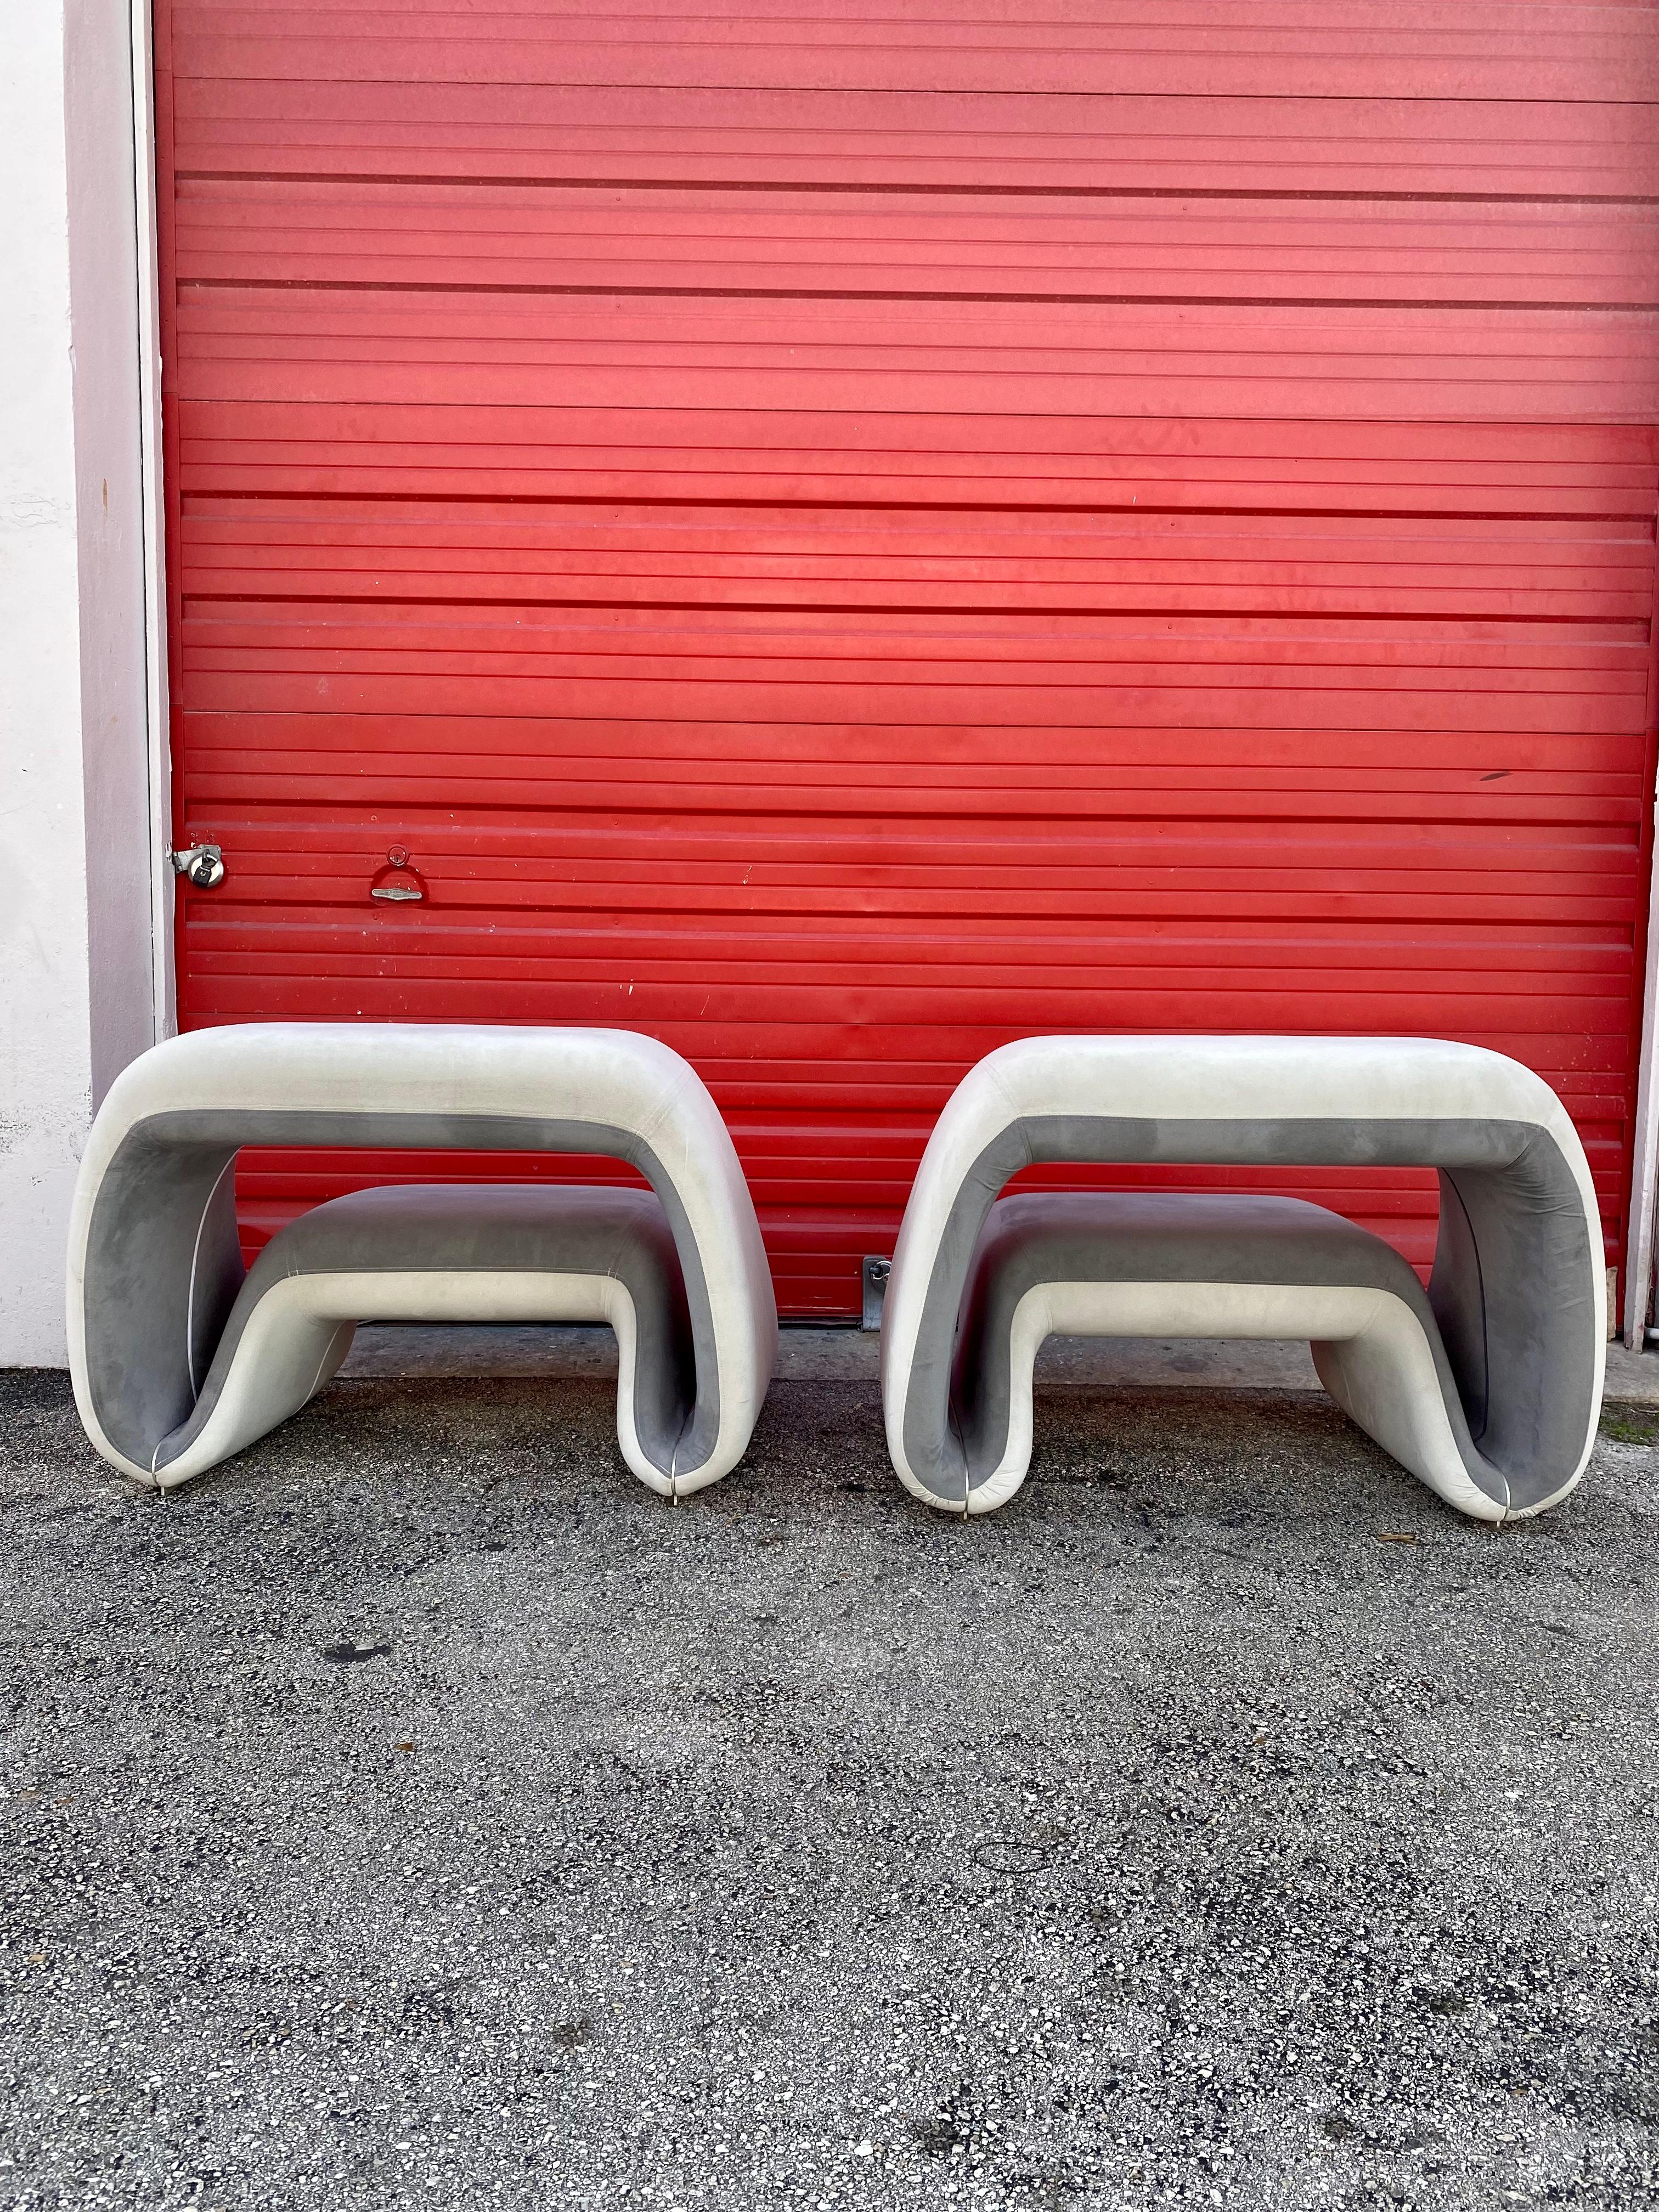 1970s Meritalia Sculptural Space Age Air Loungers Chairs, Set of 2 For Sale 1